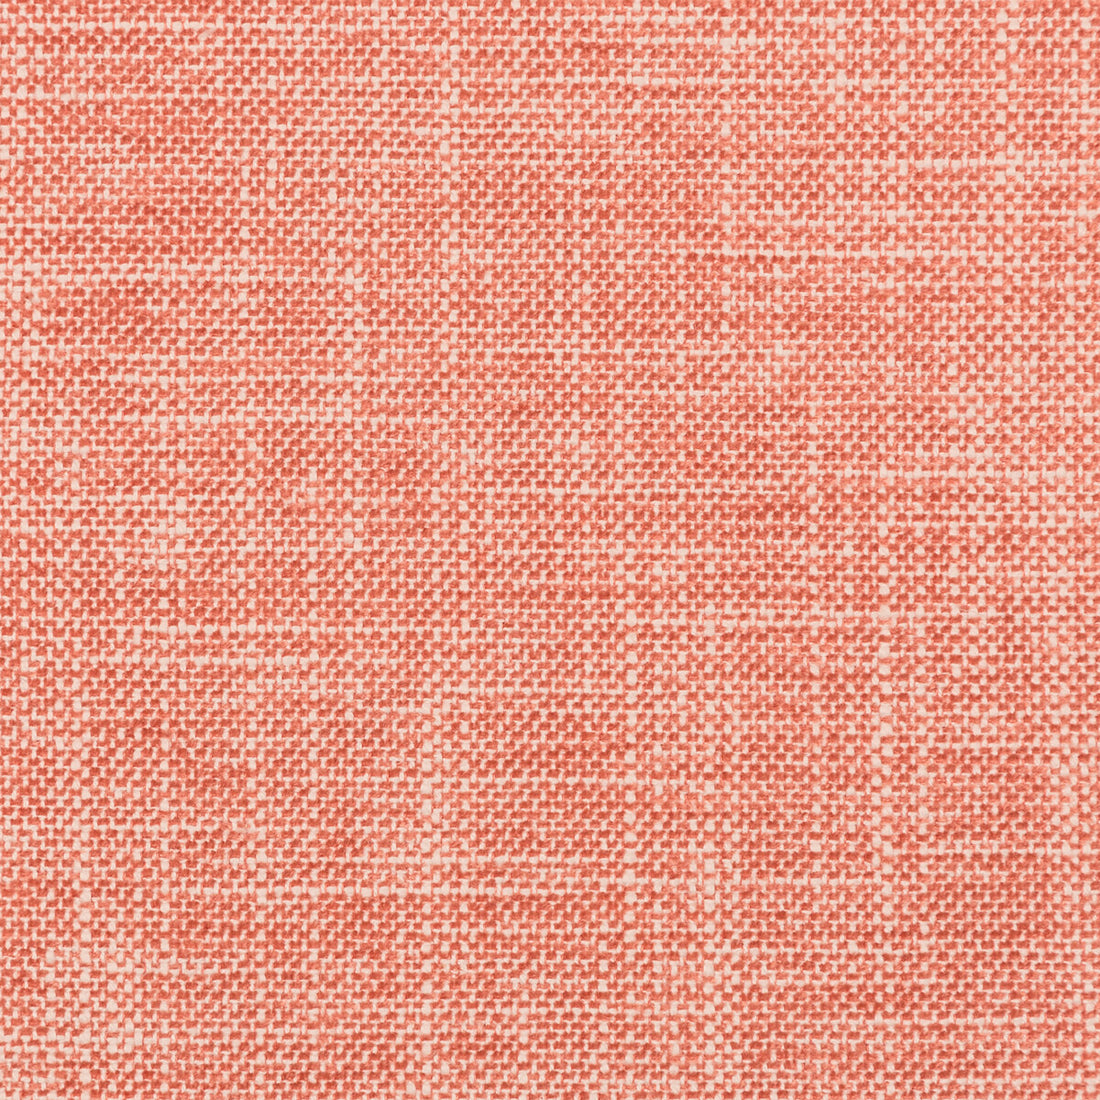 Okanda fabric in coral color - pattern 35768.12.0 - by Kravet Smart in the Performance Kravetarmor collection